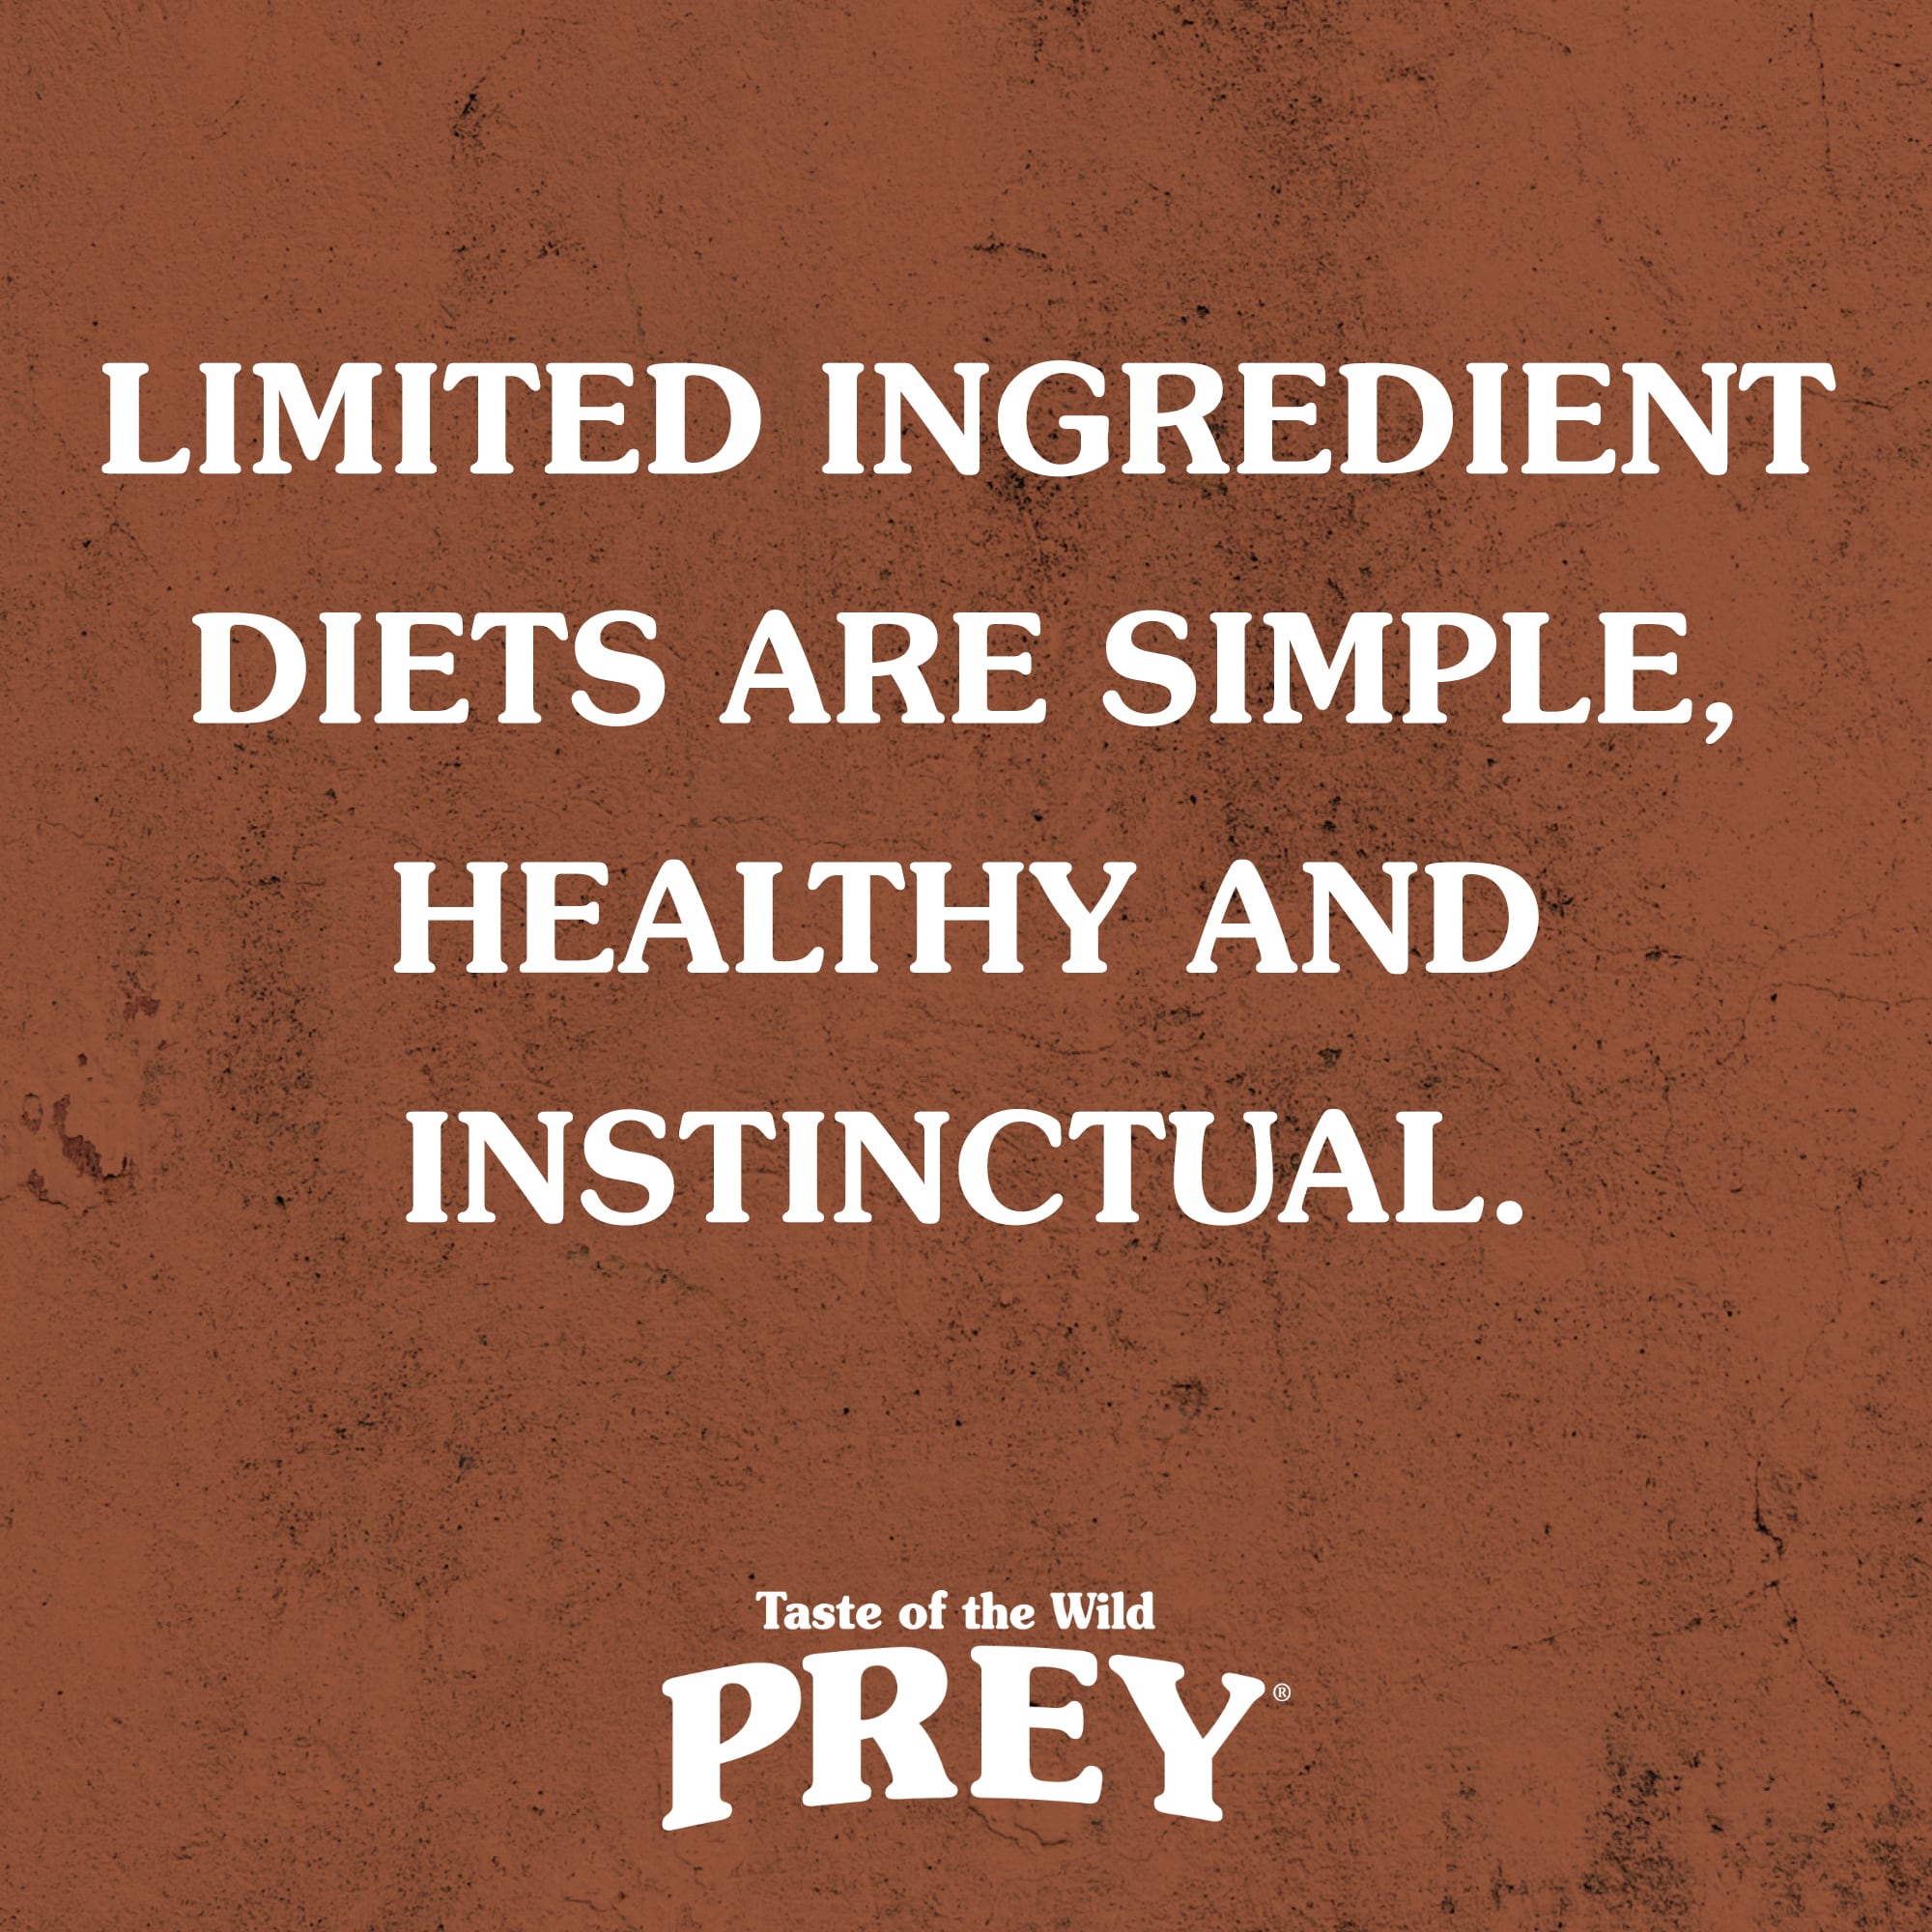 A tan graphic with text that reads 'Limited Ingredient Diets Are Simple, Healthy and Instinctual'.